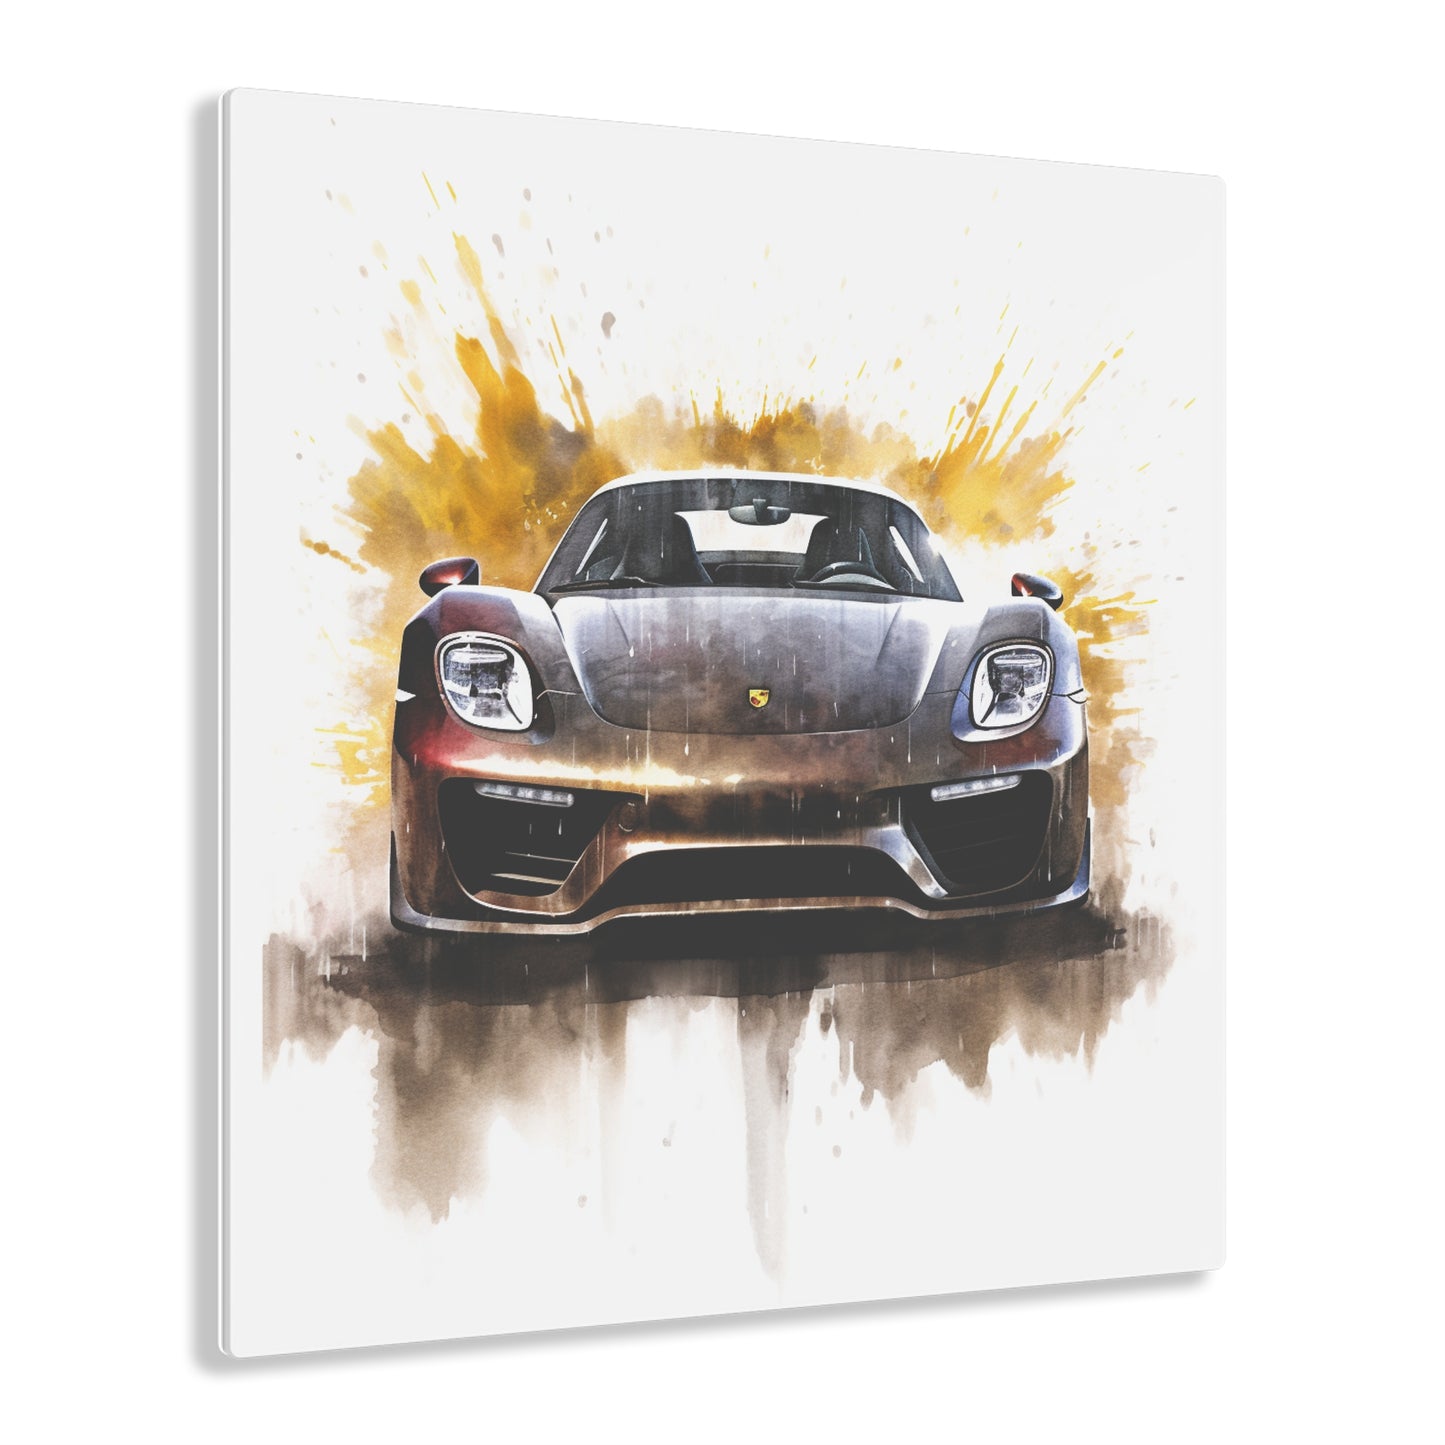 Acrylic Prints 918 Spyder white background driving fast with water splashing 1